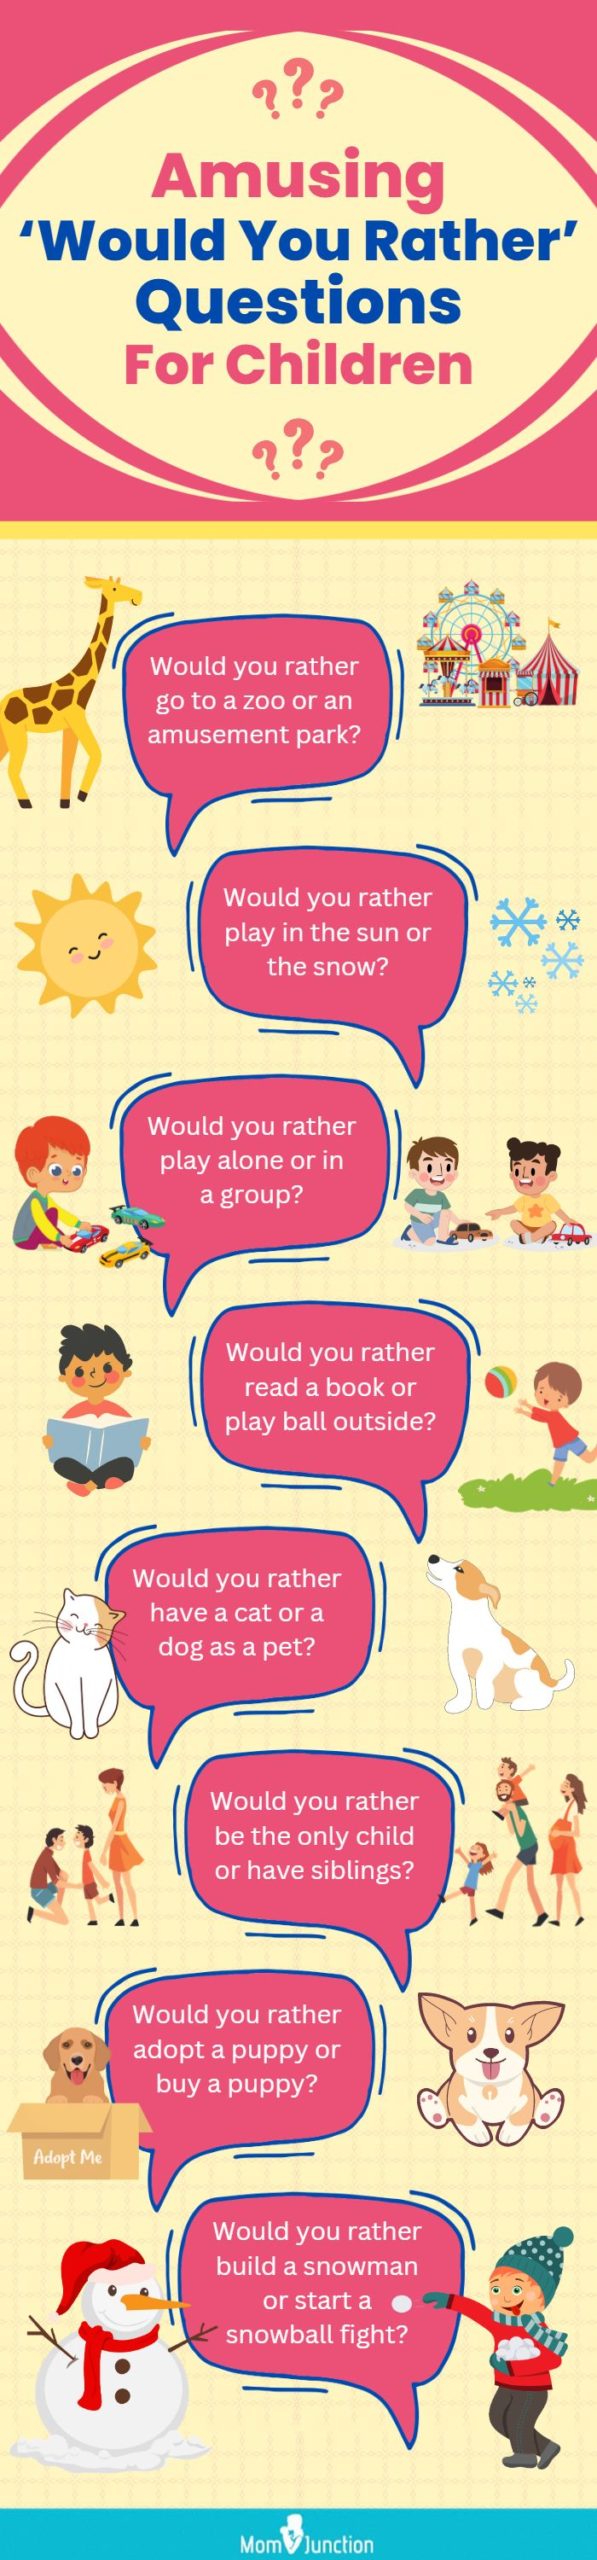 amusing would you rather questions for children (infographic)